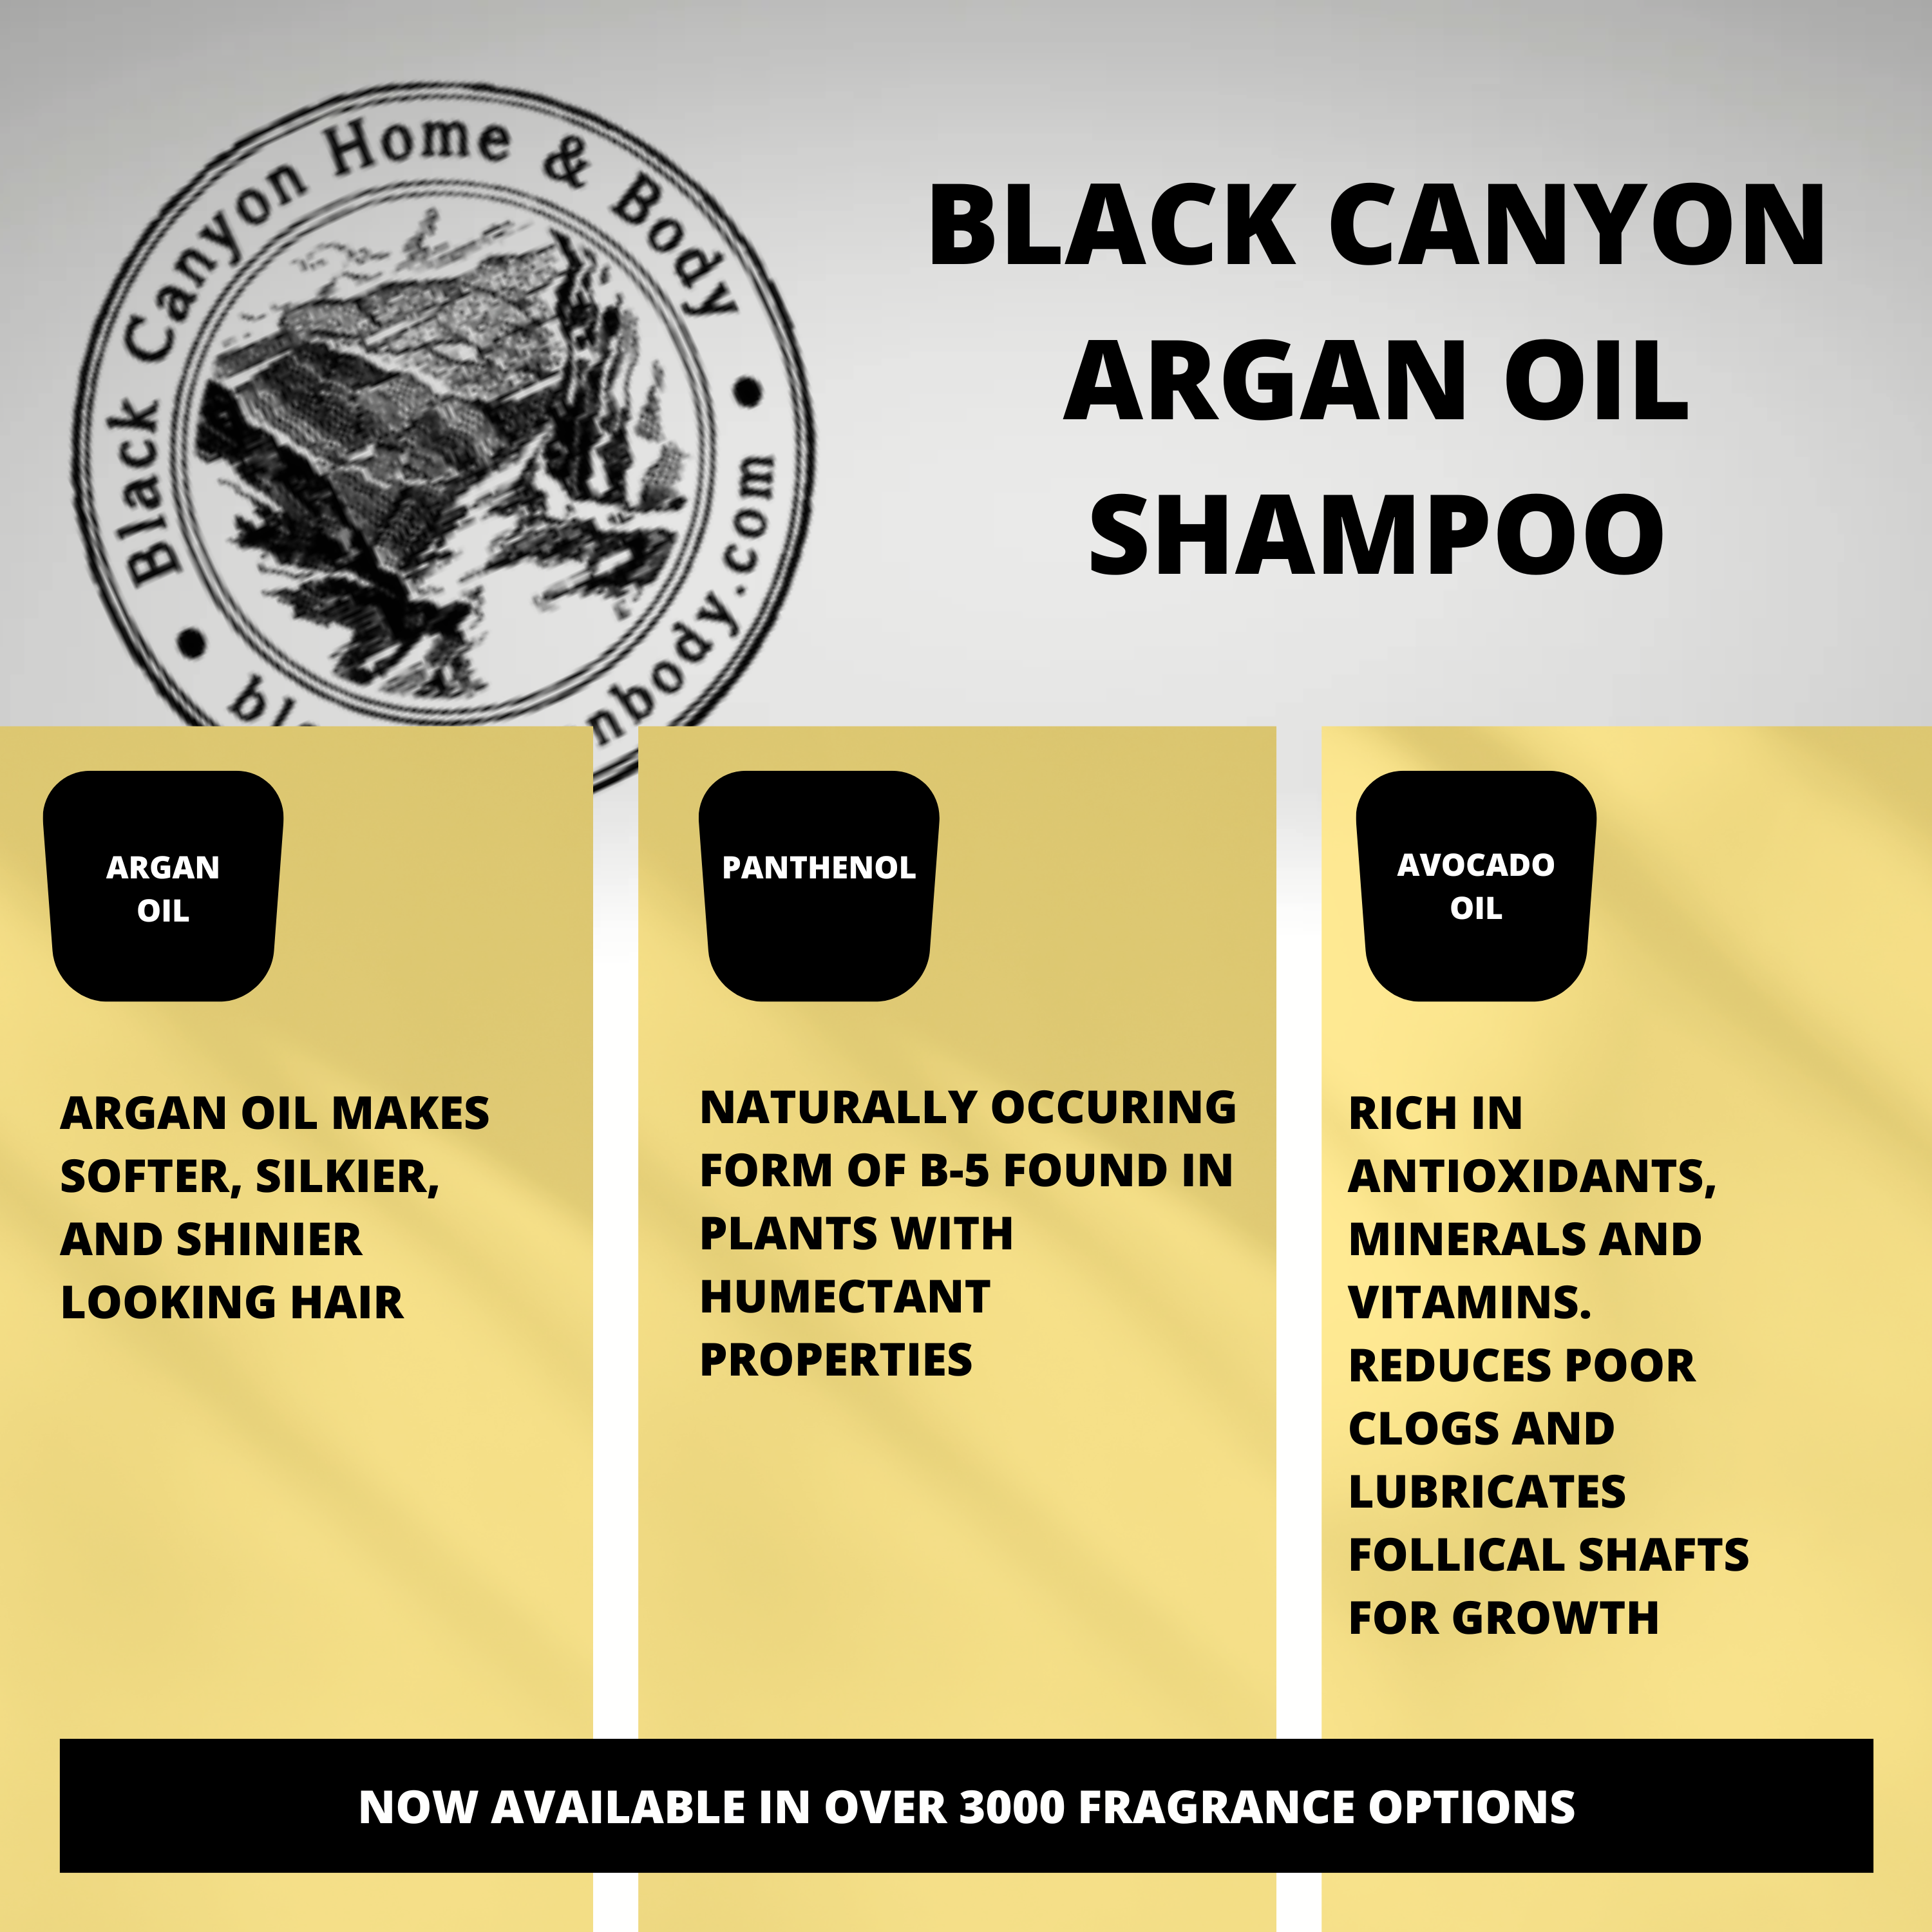 Black Canyon Chocolate & Musk Scented Shampoo with Argan Oil